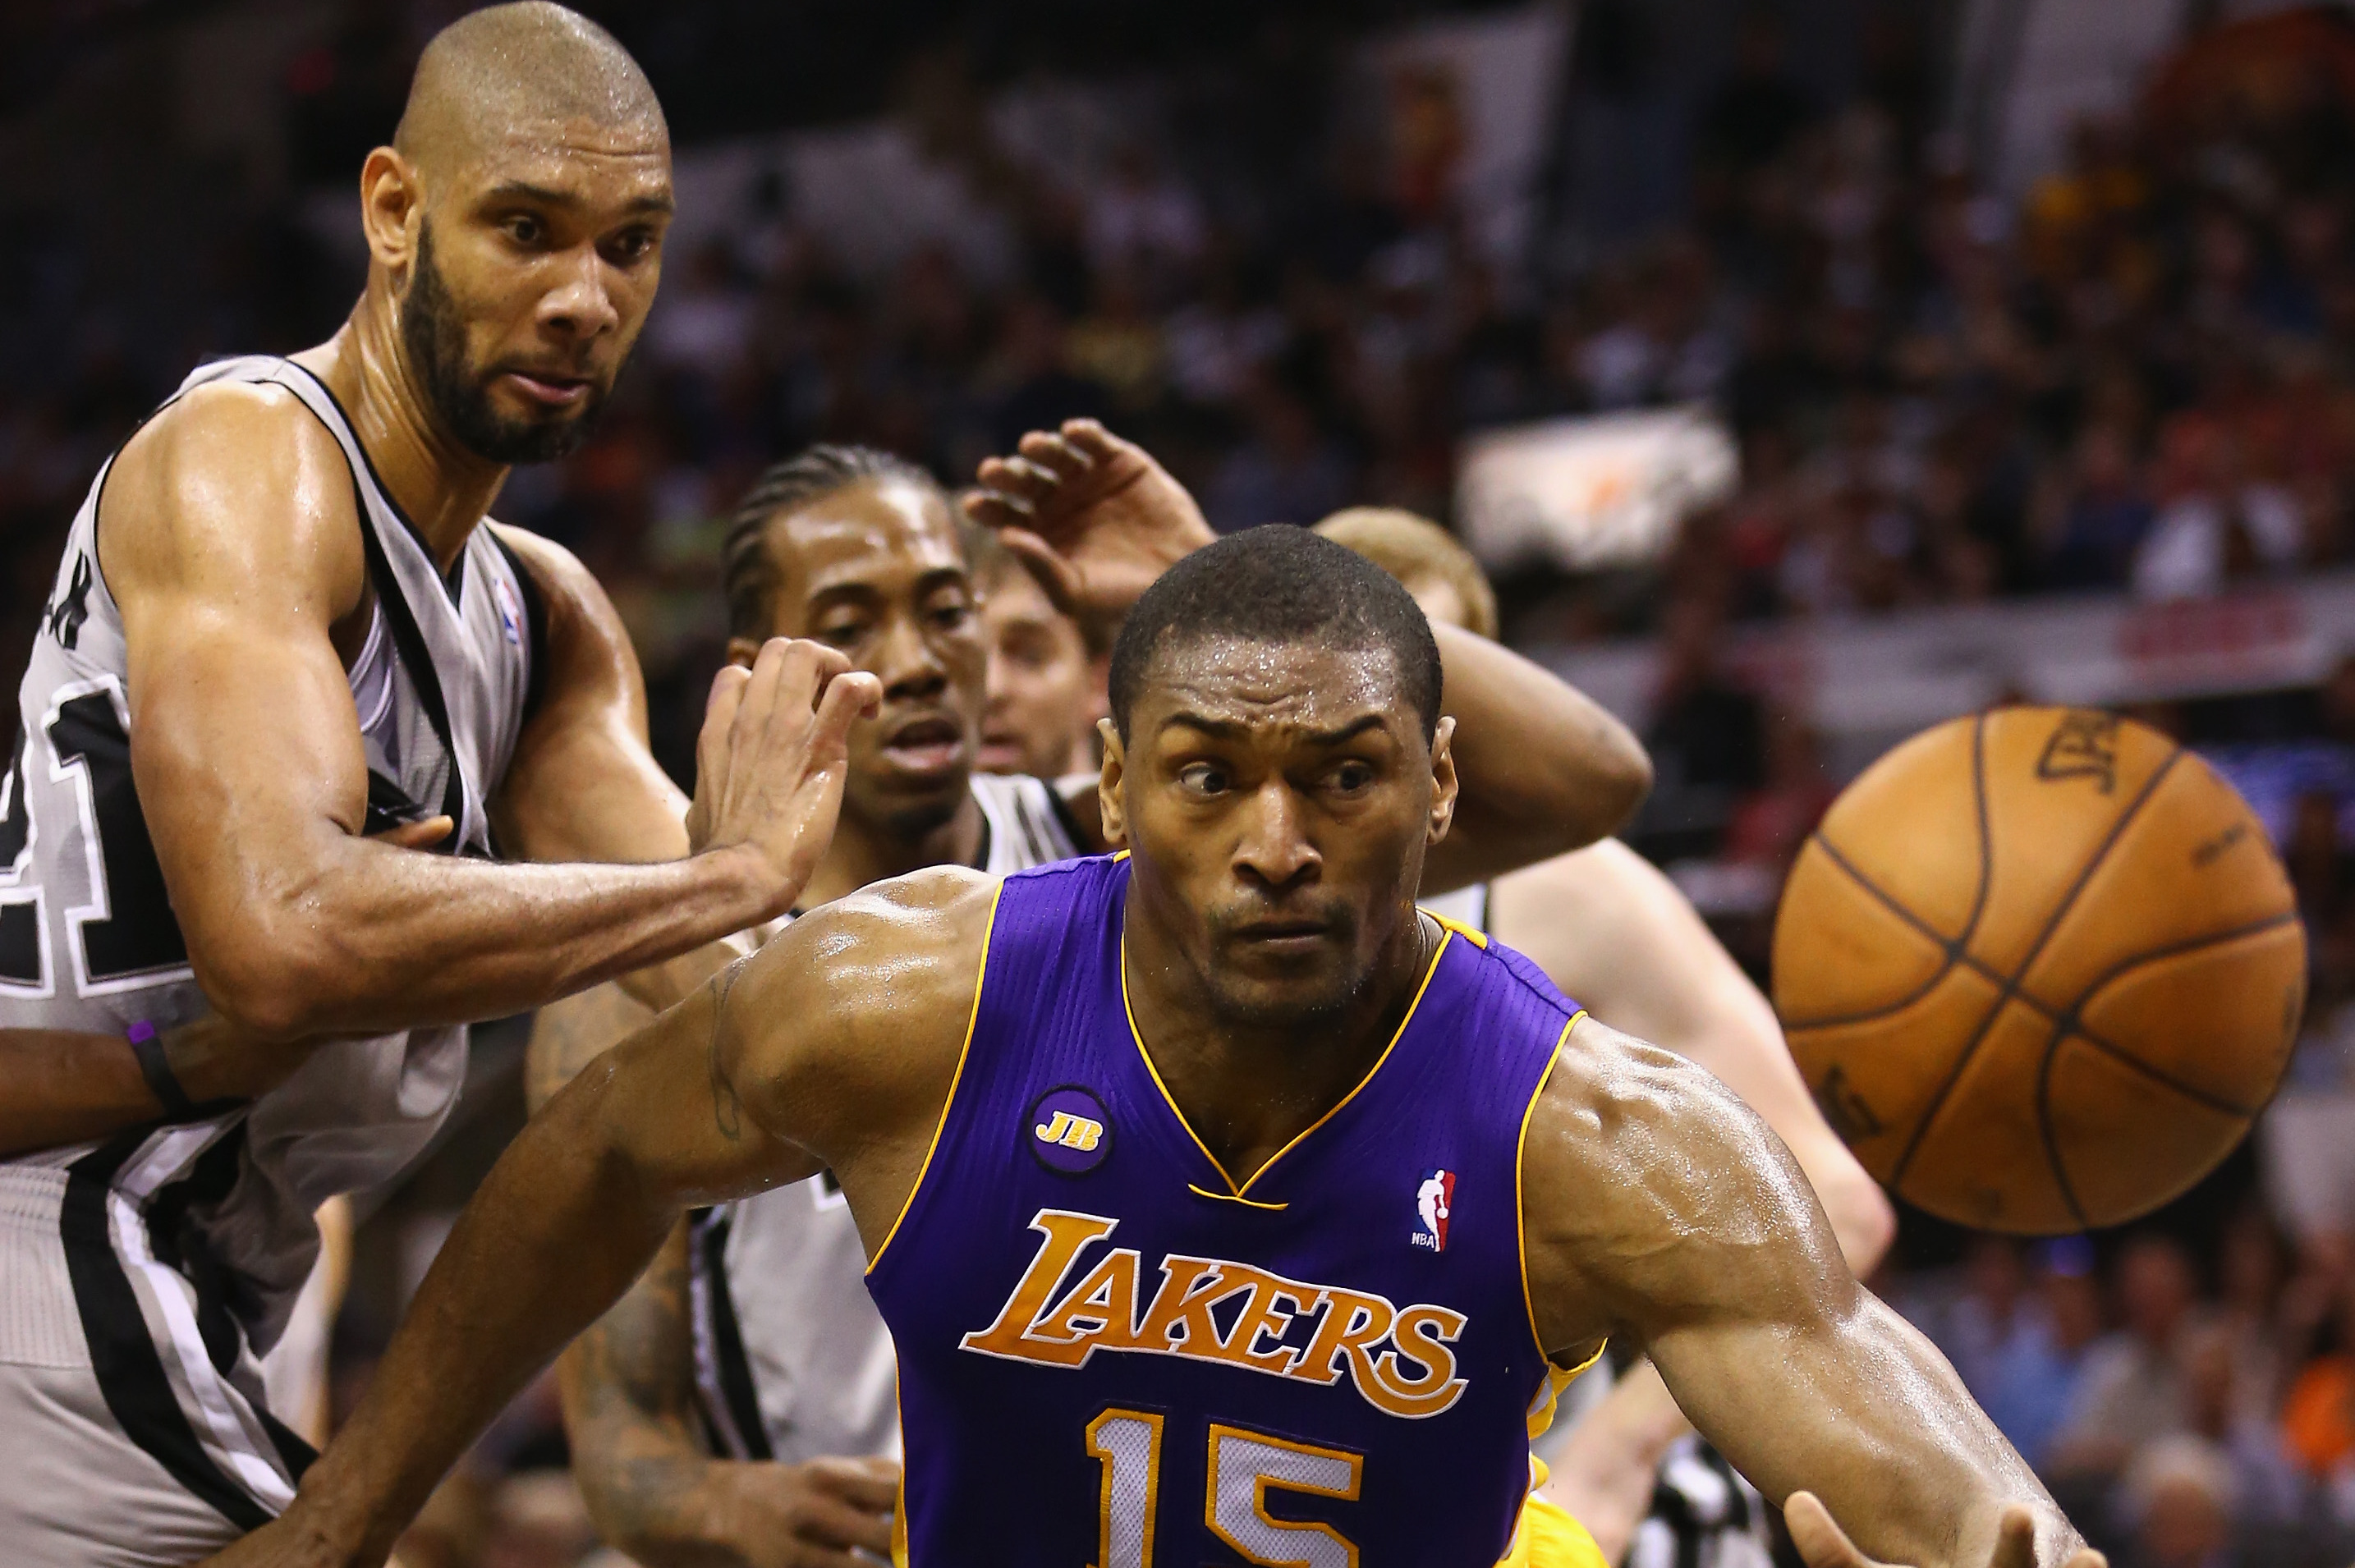 Bleacher Report on X: Ron Artest, who changed his name to Metta